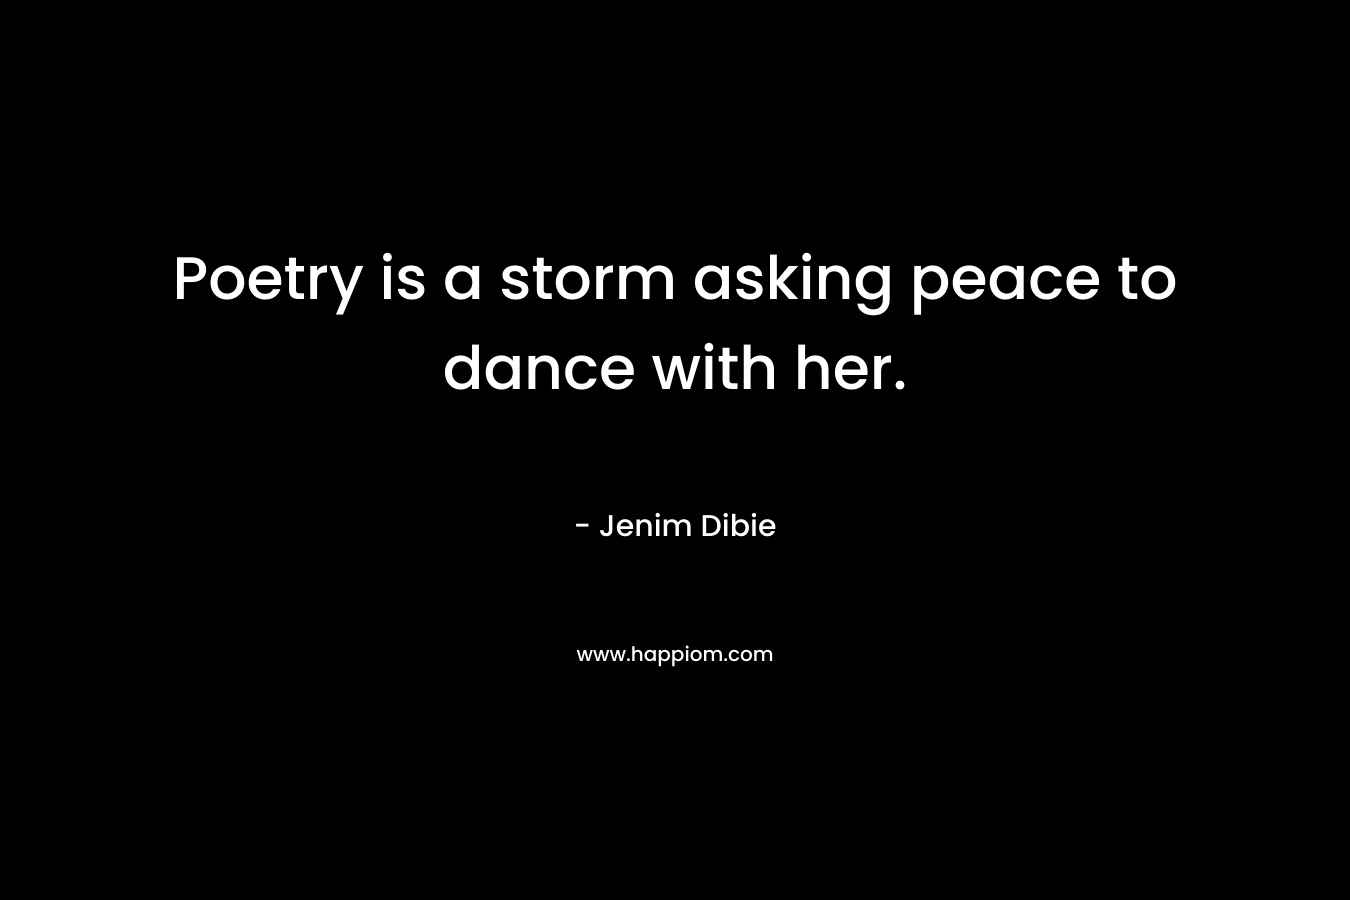 Poetry is a storm asking peace to dance with her.